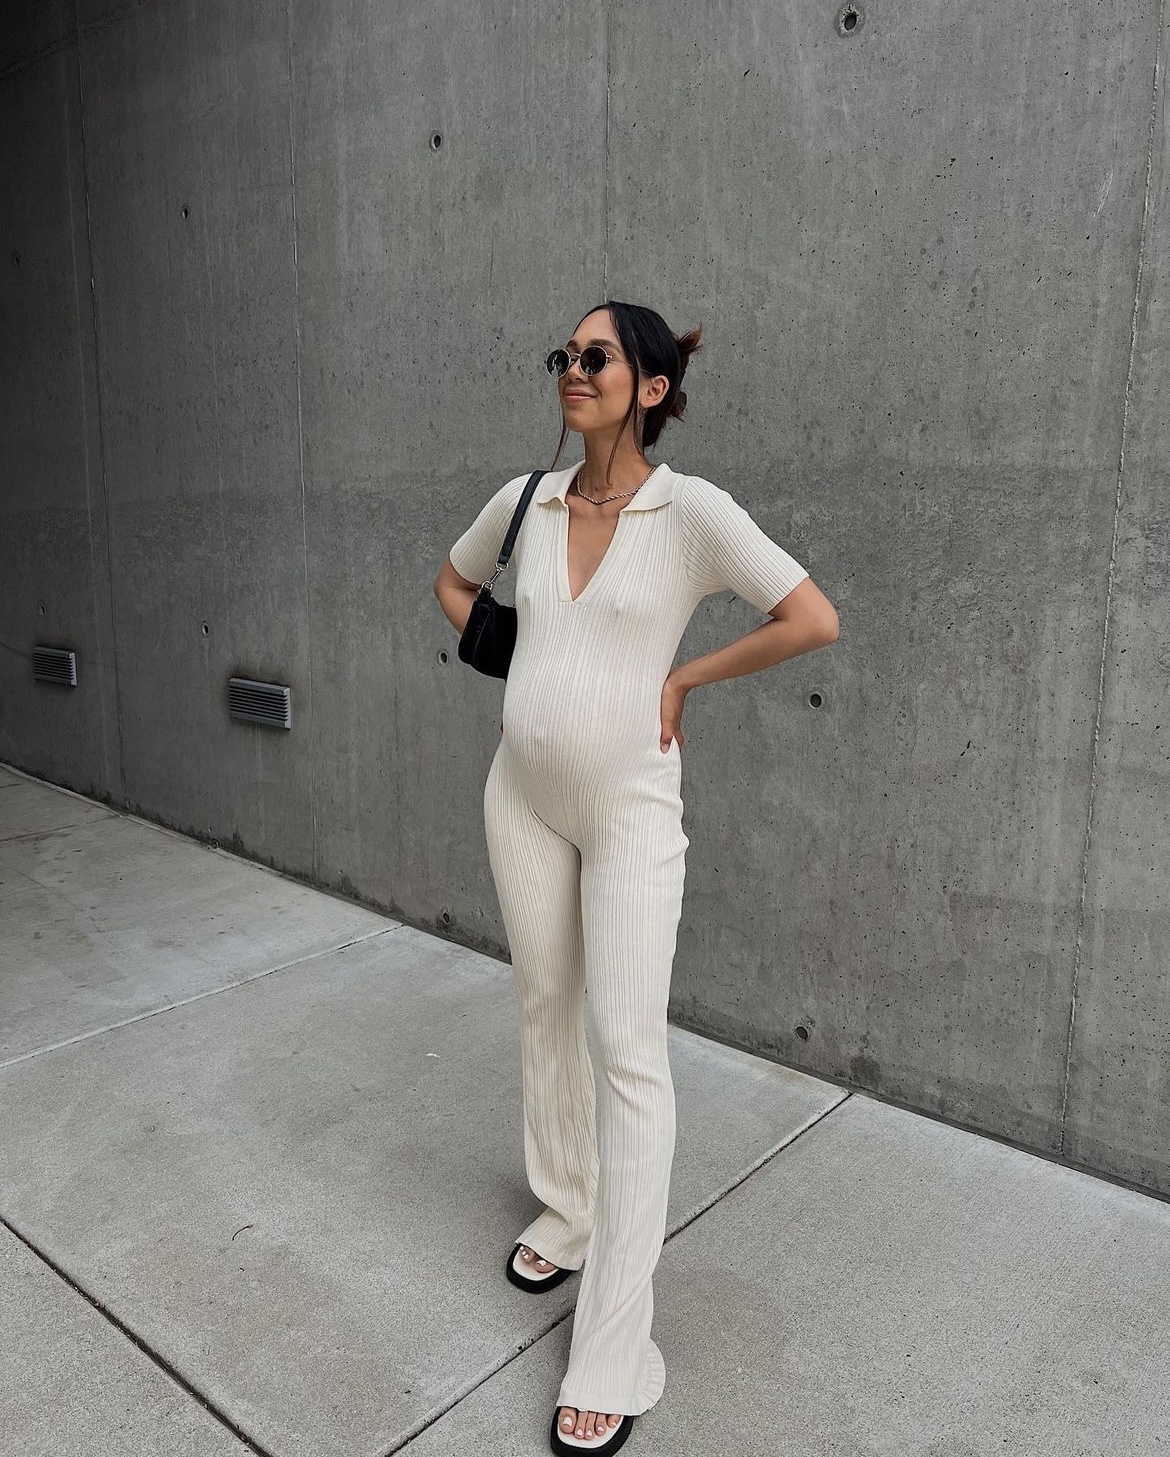 21 Stylish Spring Maternity Outfit Ideas That Don't Look Frumpy - Bjarni  Baby